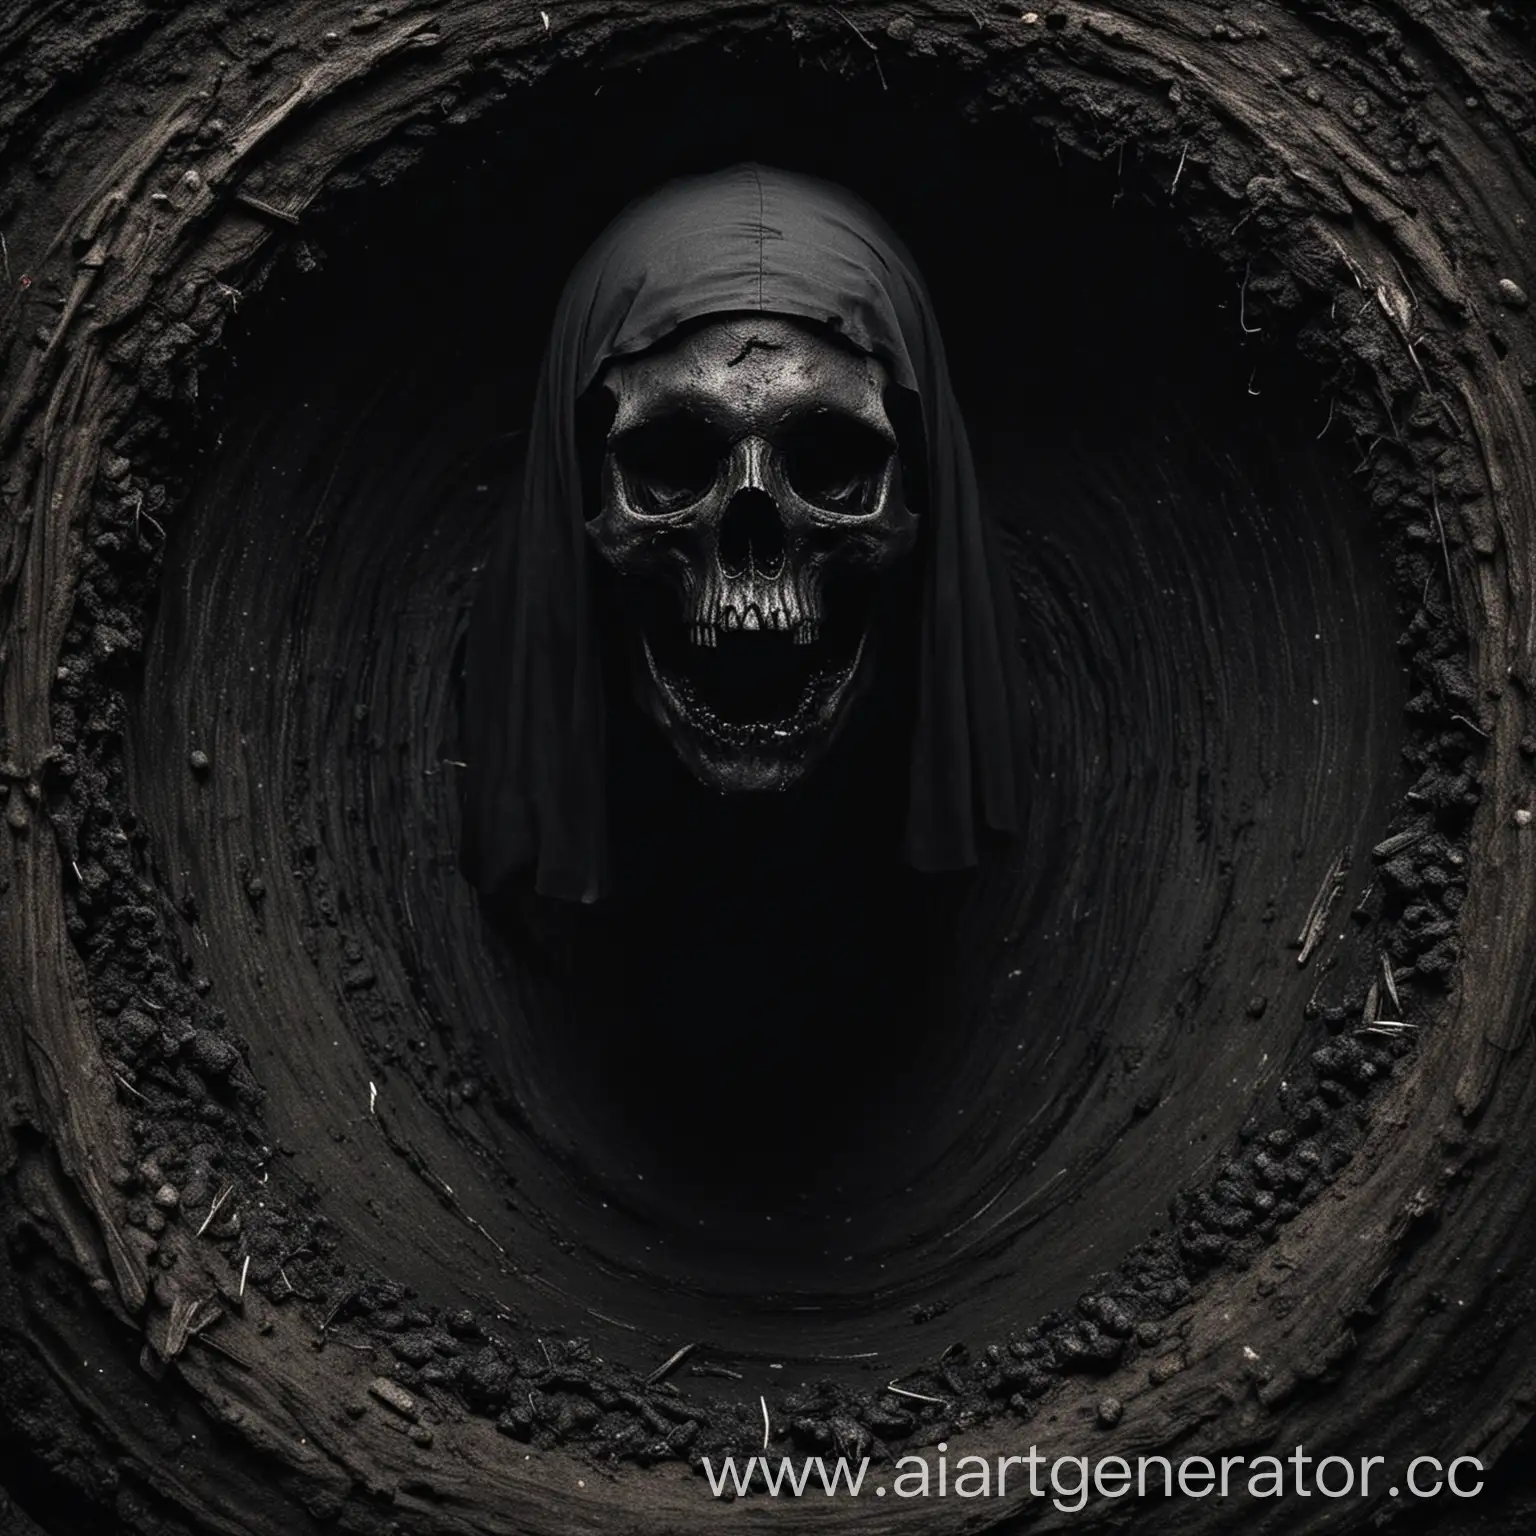 Sinister-Black-Death-Emerging-from-Dark-Abyss